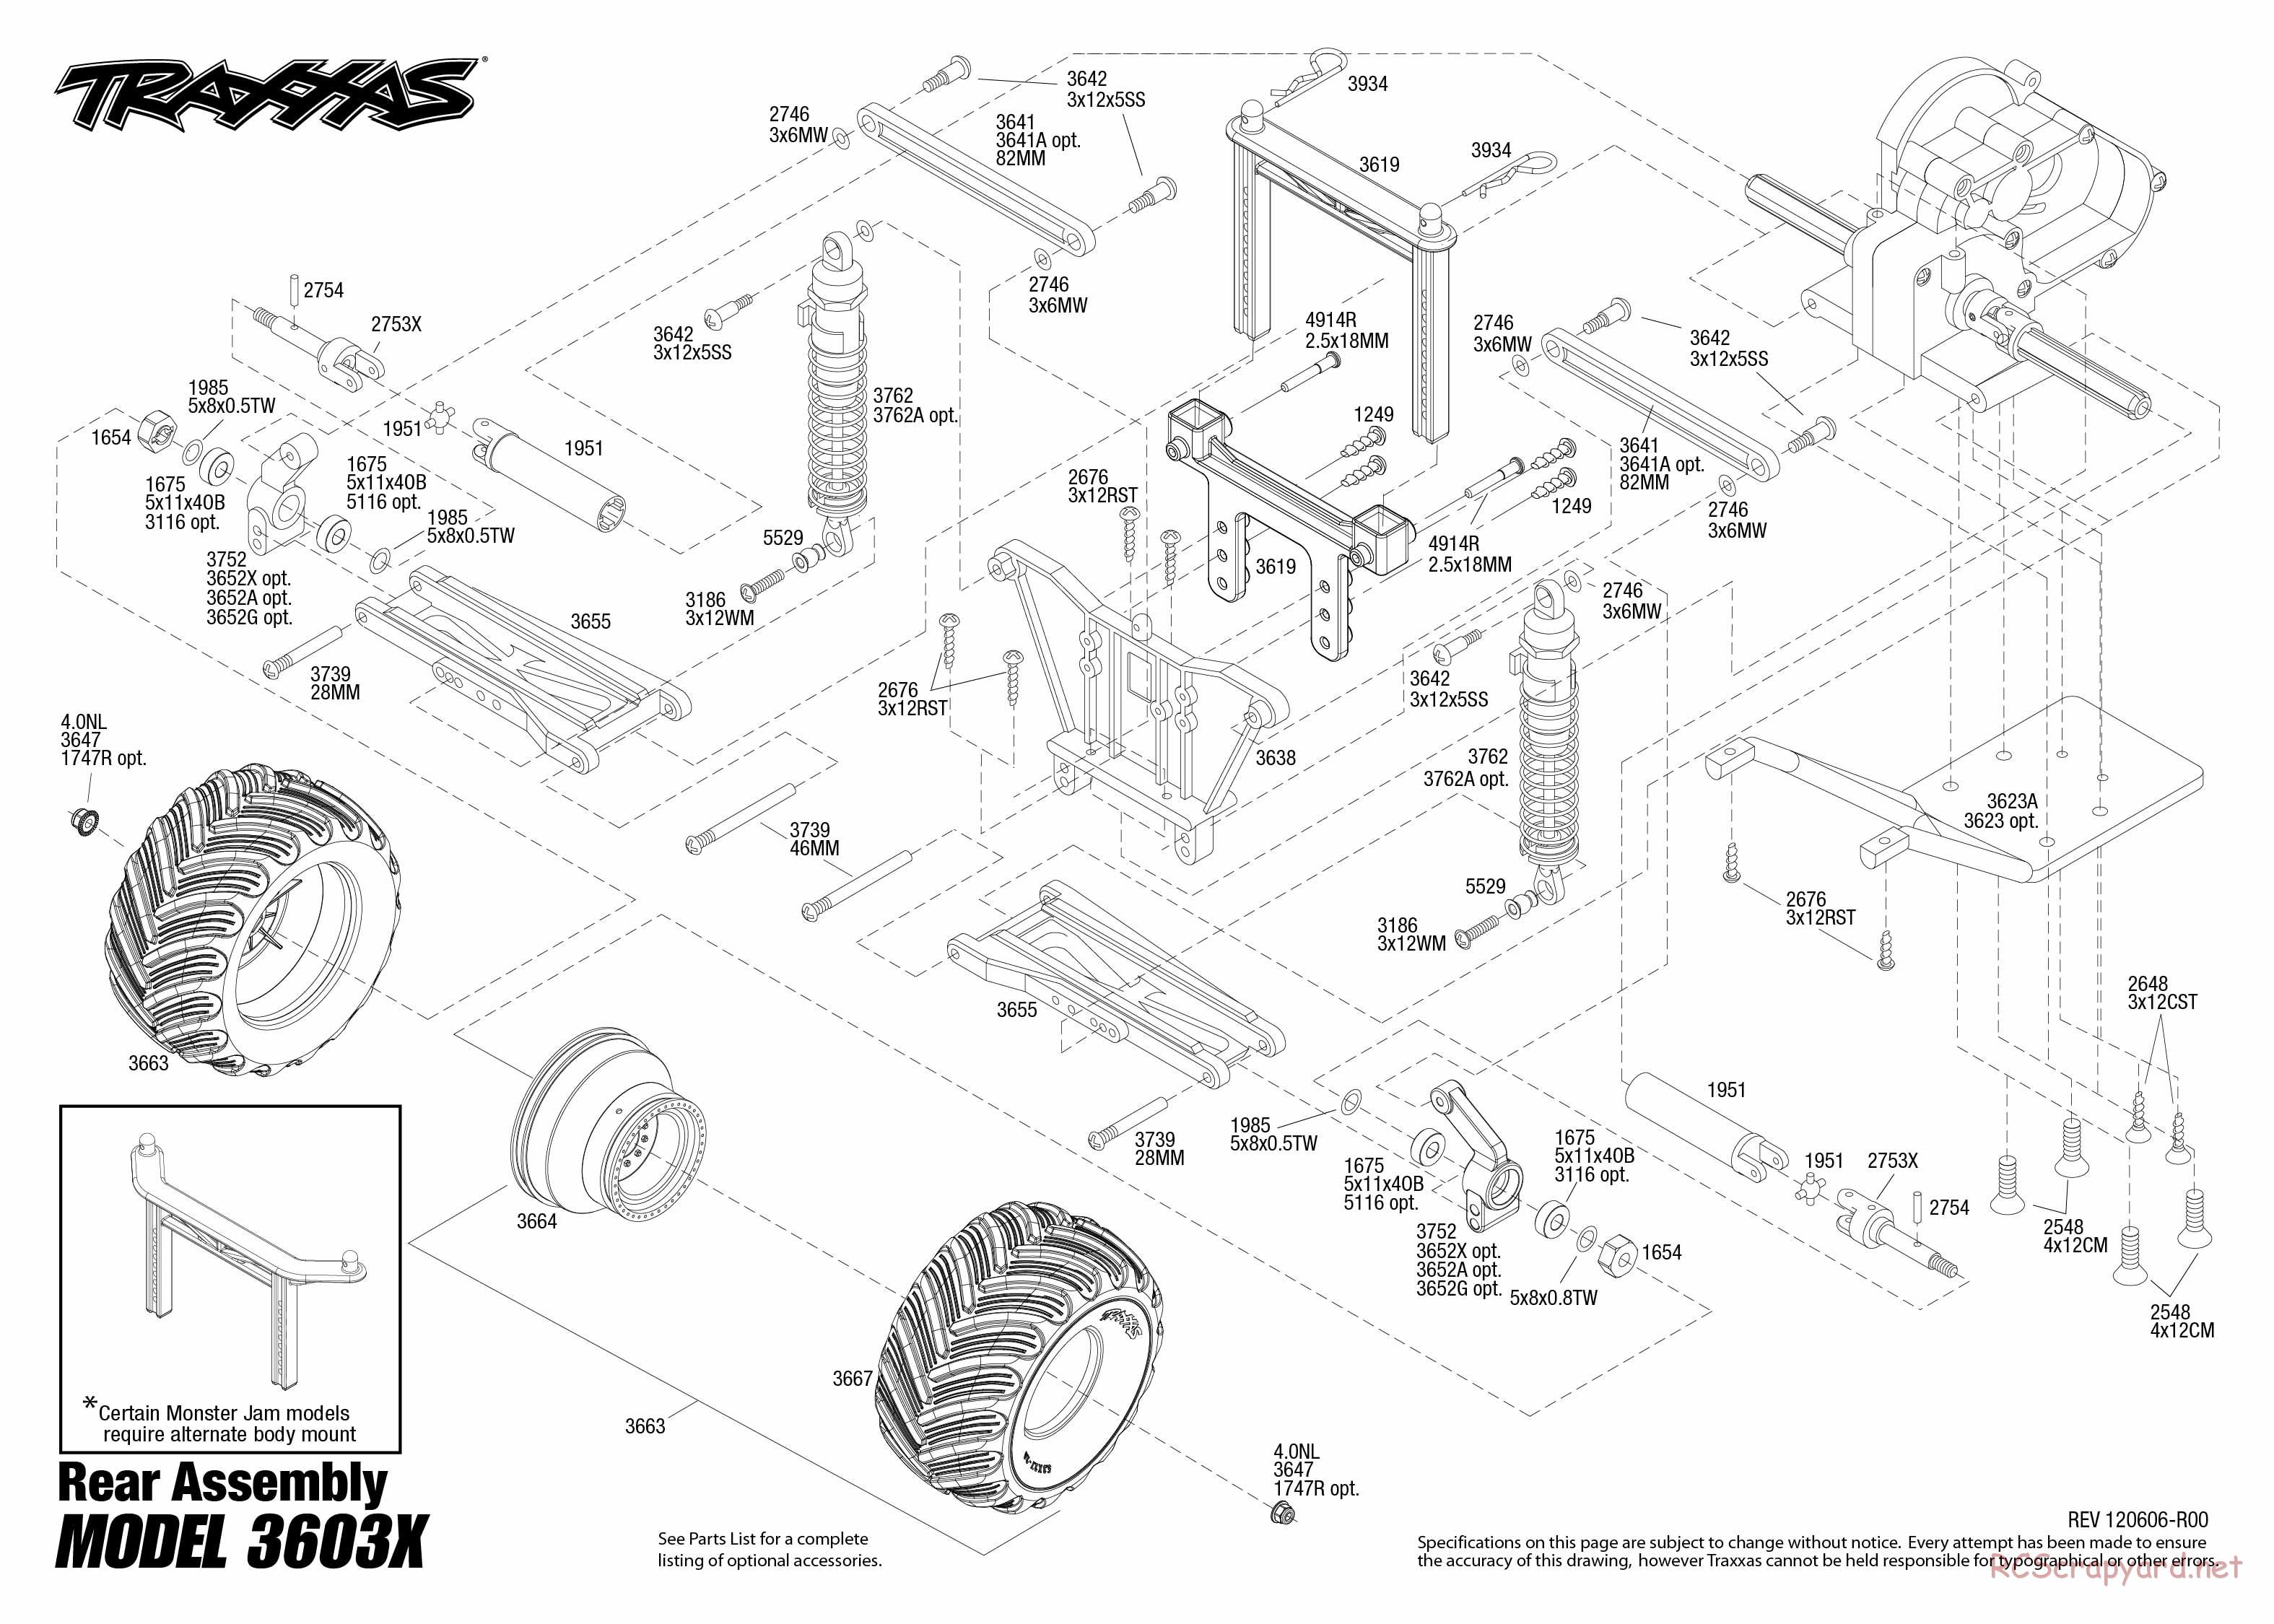 Traxxas - Monster Jam - Grave Digger 30th Anniversary Special - Exploded Views - Page 3